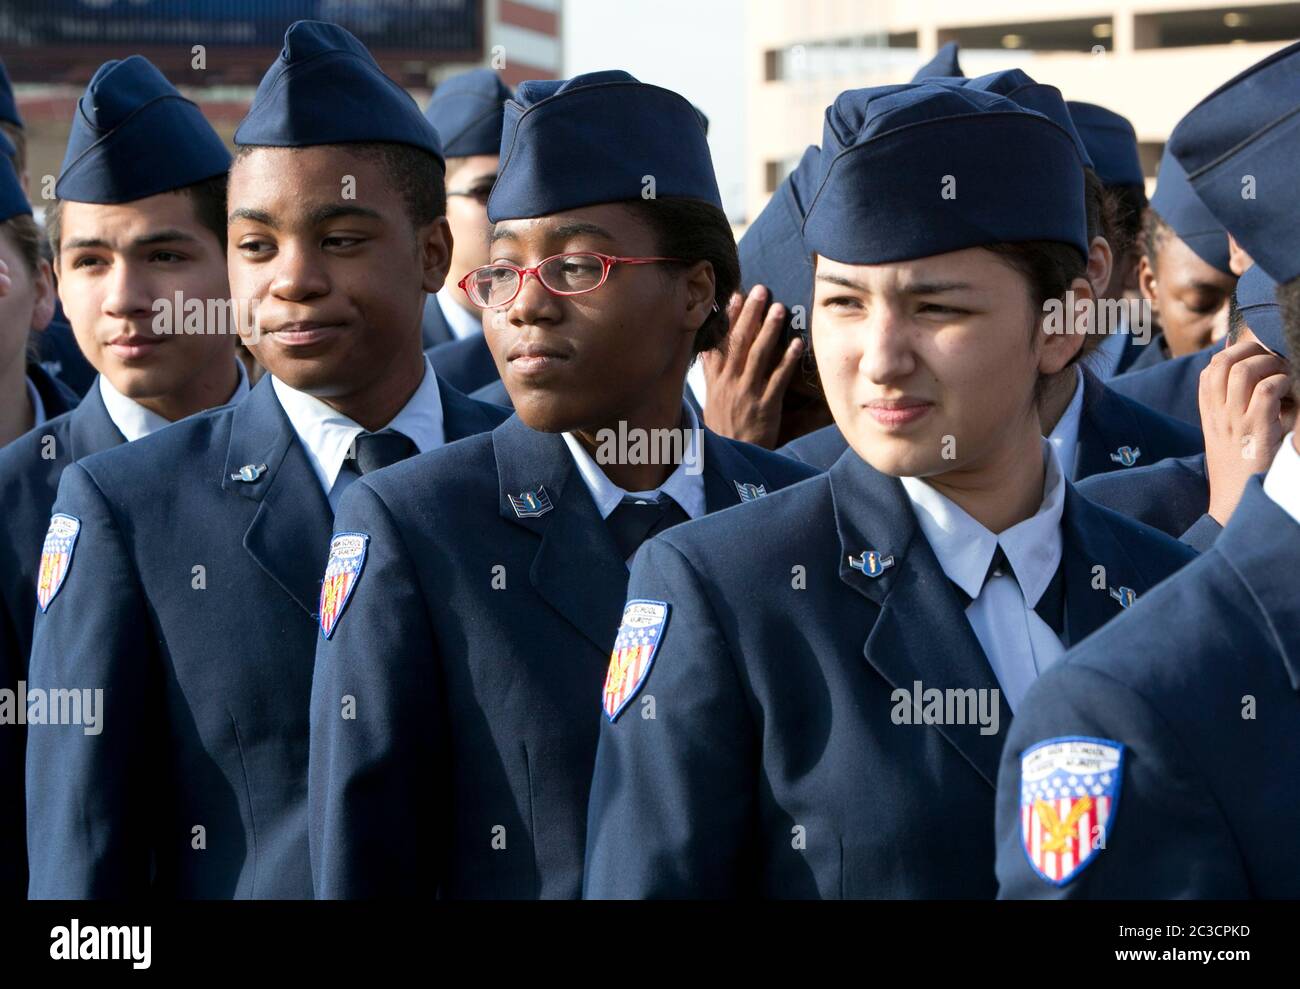 November 11th, 2014 Austin, Texas USA: Uniformed members of a local high school Air Force Junior ROTC group march in the annual Veterans Day parade down Congress Avenue. ©Marjorie Kamys Cotera/Daemmrich Photography Stock Photo